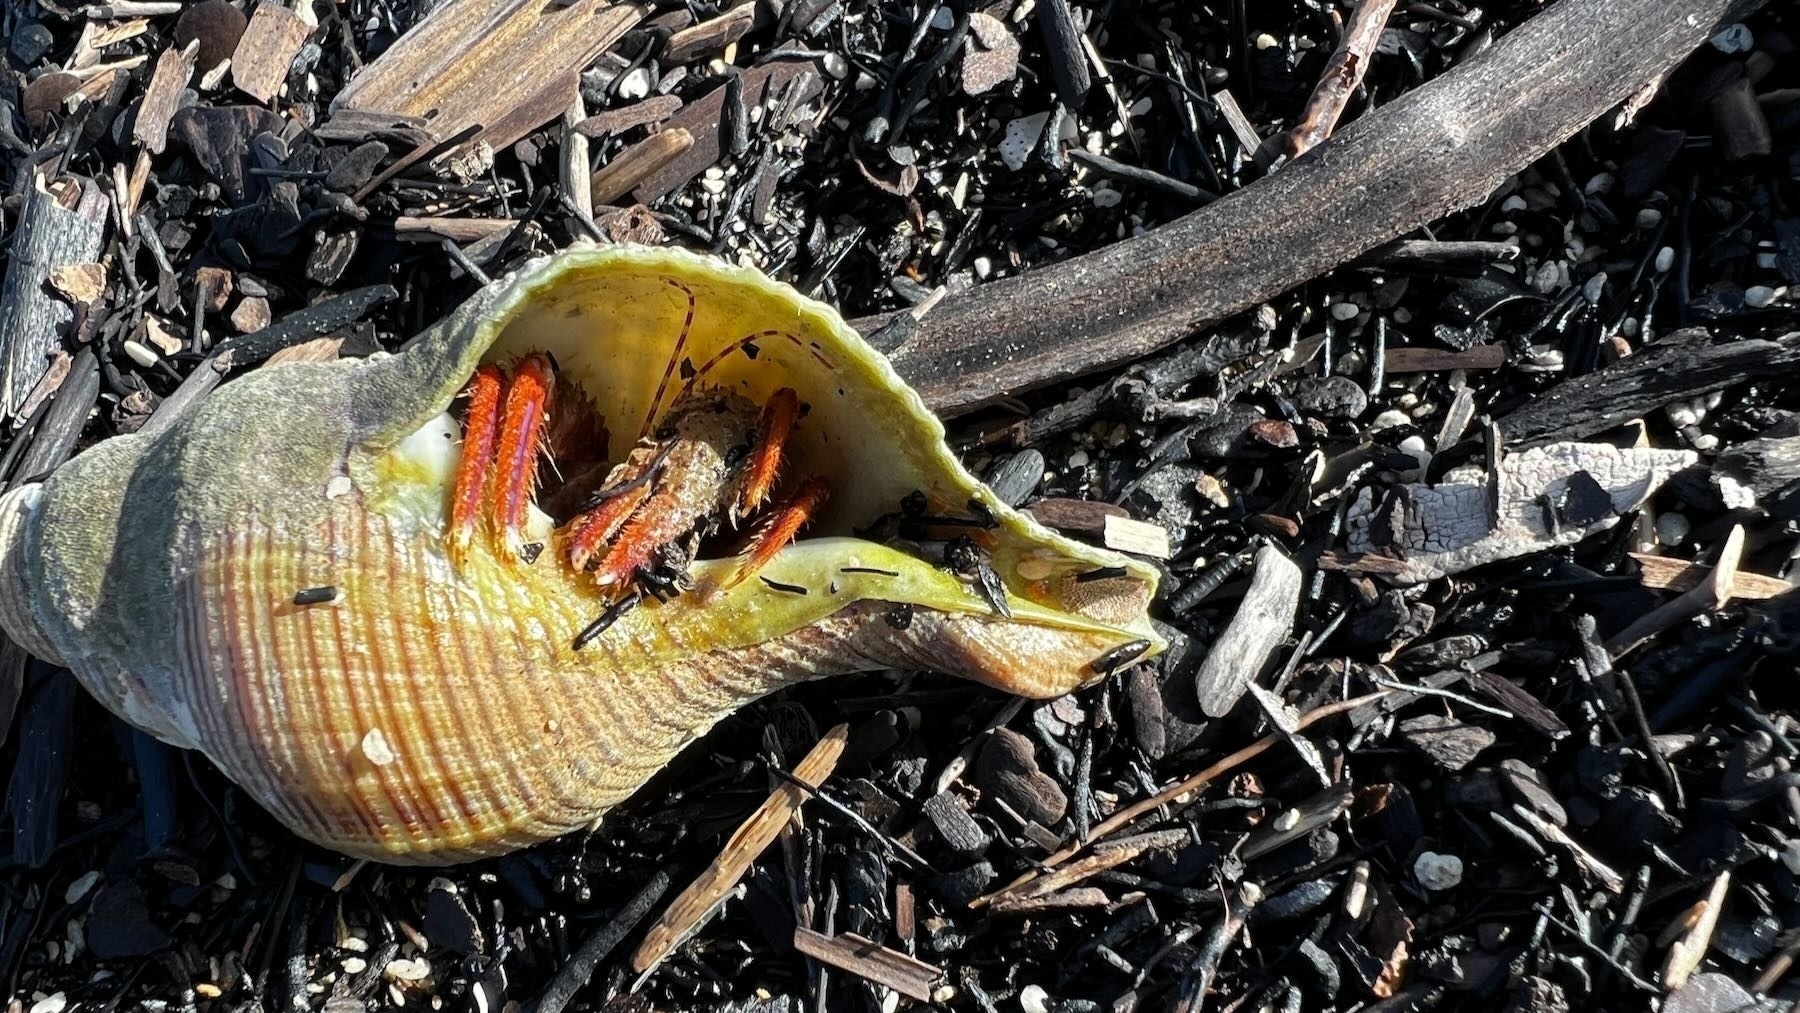 Hermit crab withdraws into its shell.